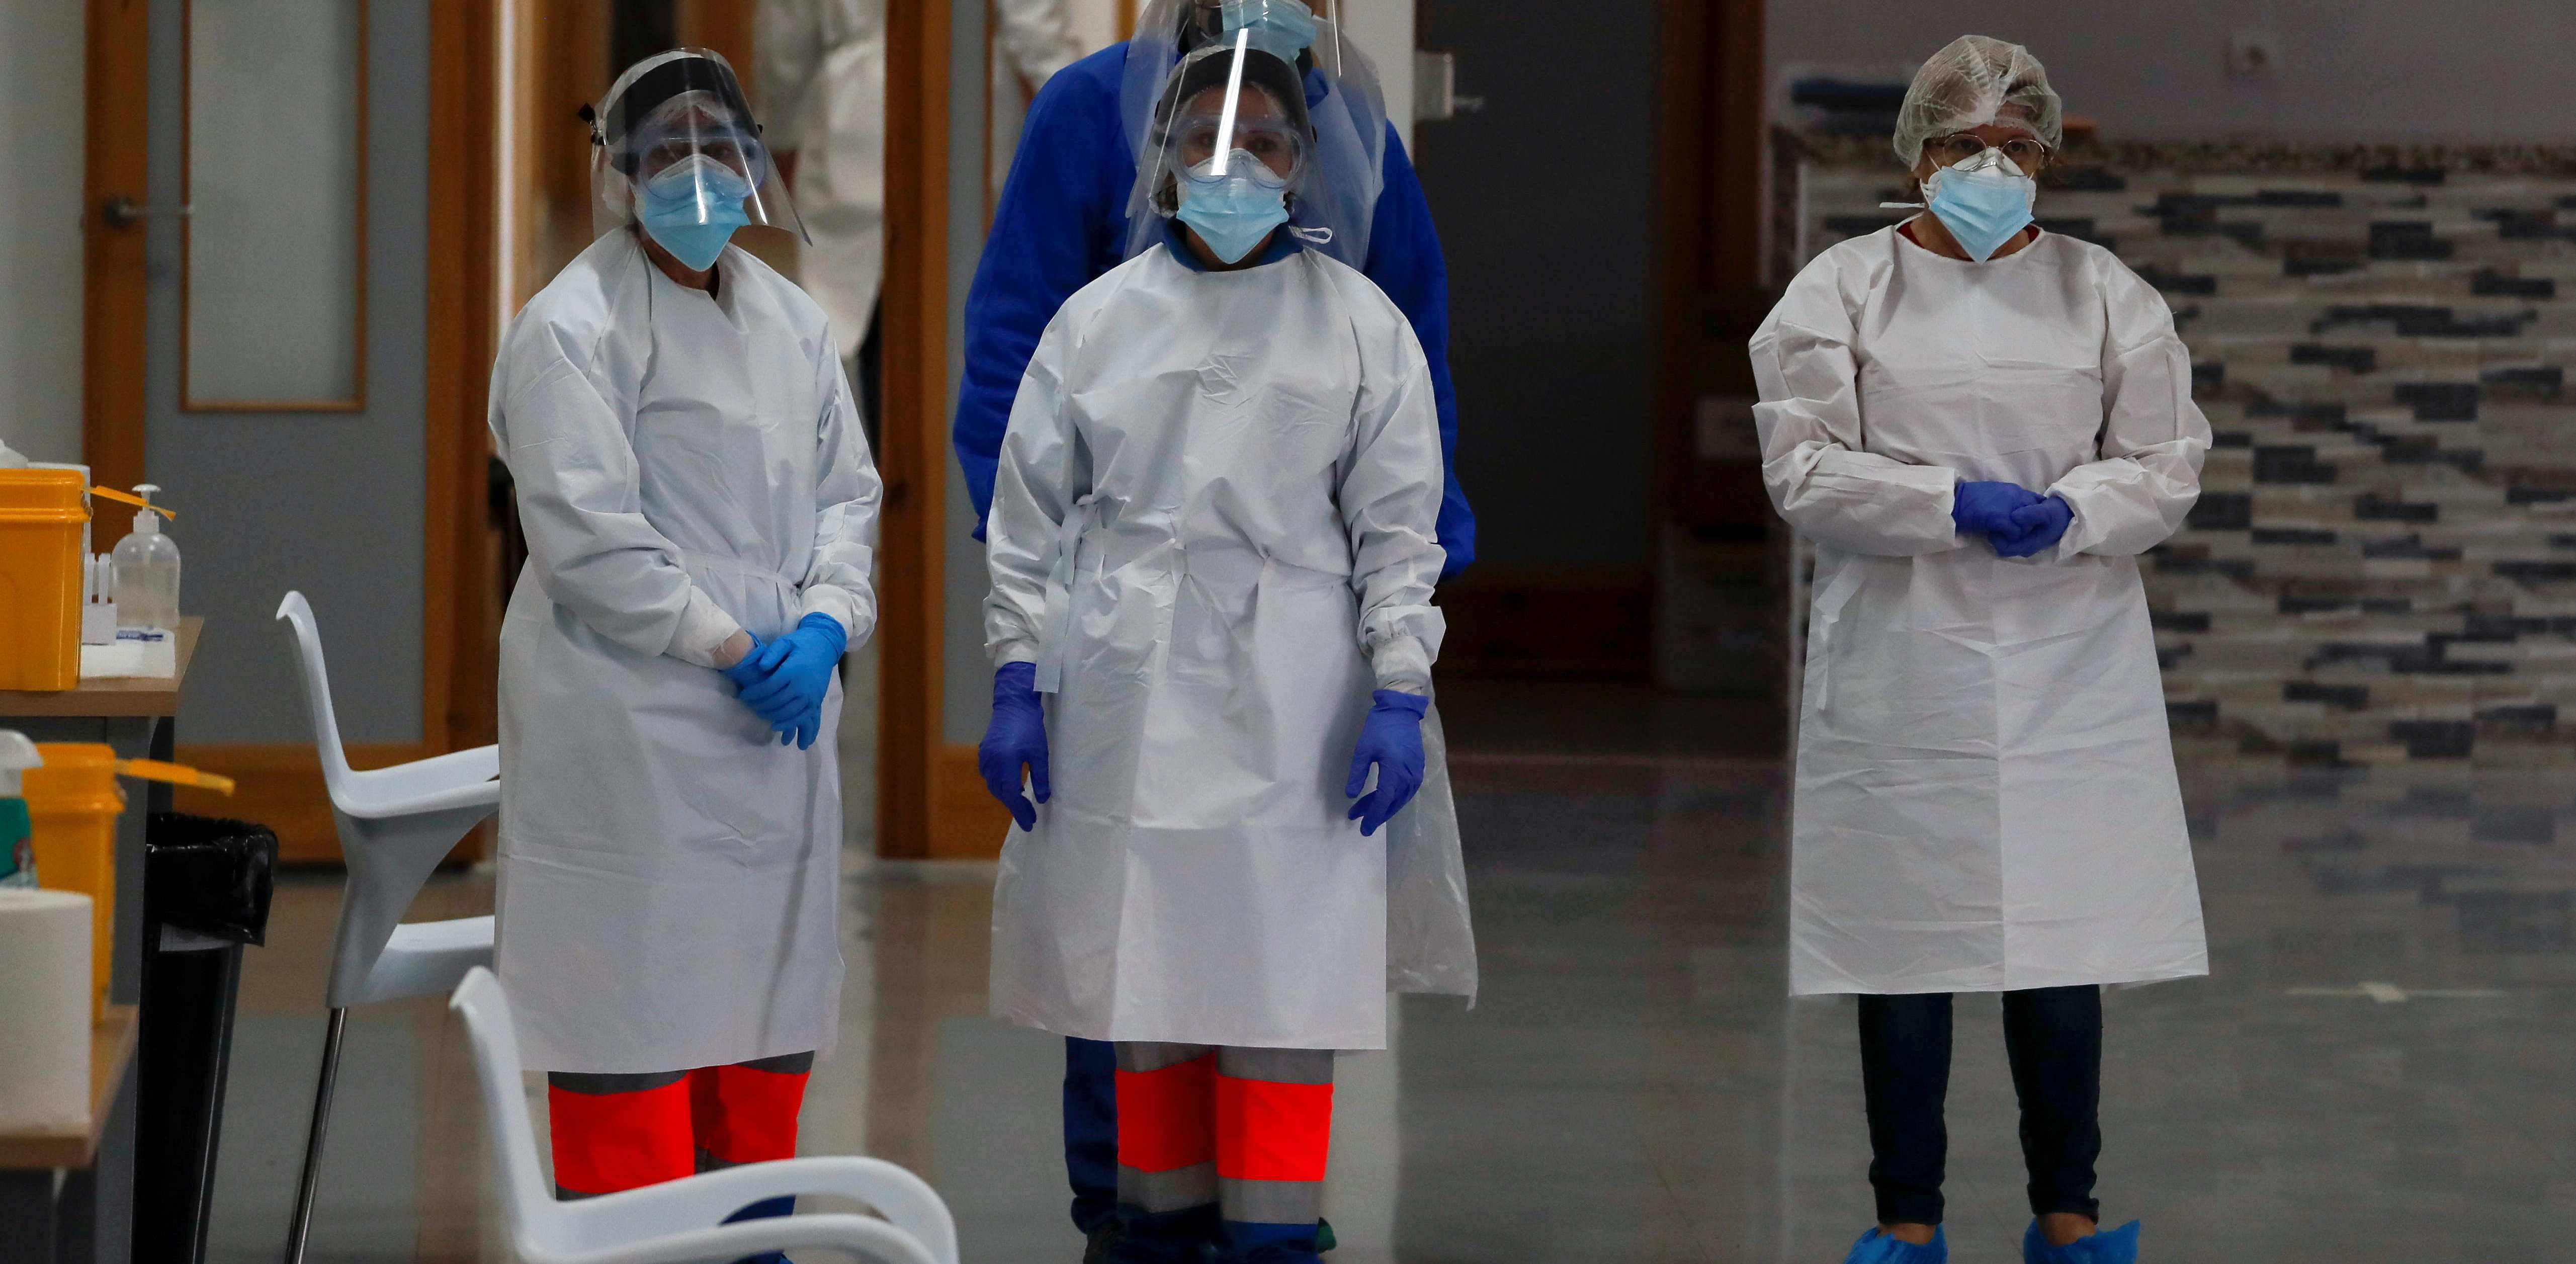 The pandemic caught the nation flat-footed in March, but epidemiologists have been warning for months of a fall and winter wave as people are driven indoors, schools resume in-person classes and Americans grow tired of months of precautions. Credit: Reuters